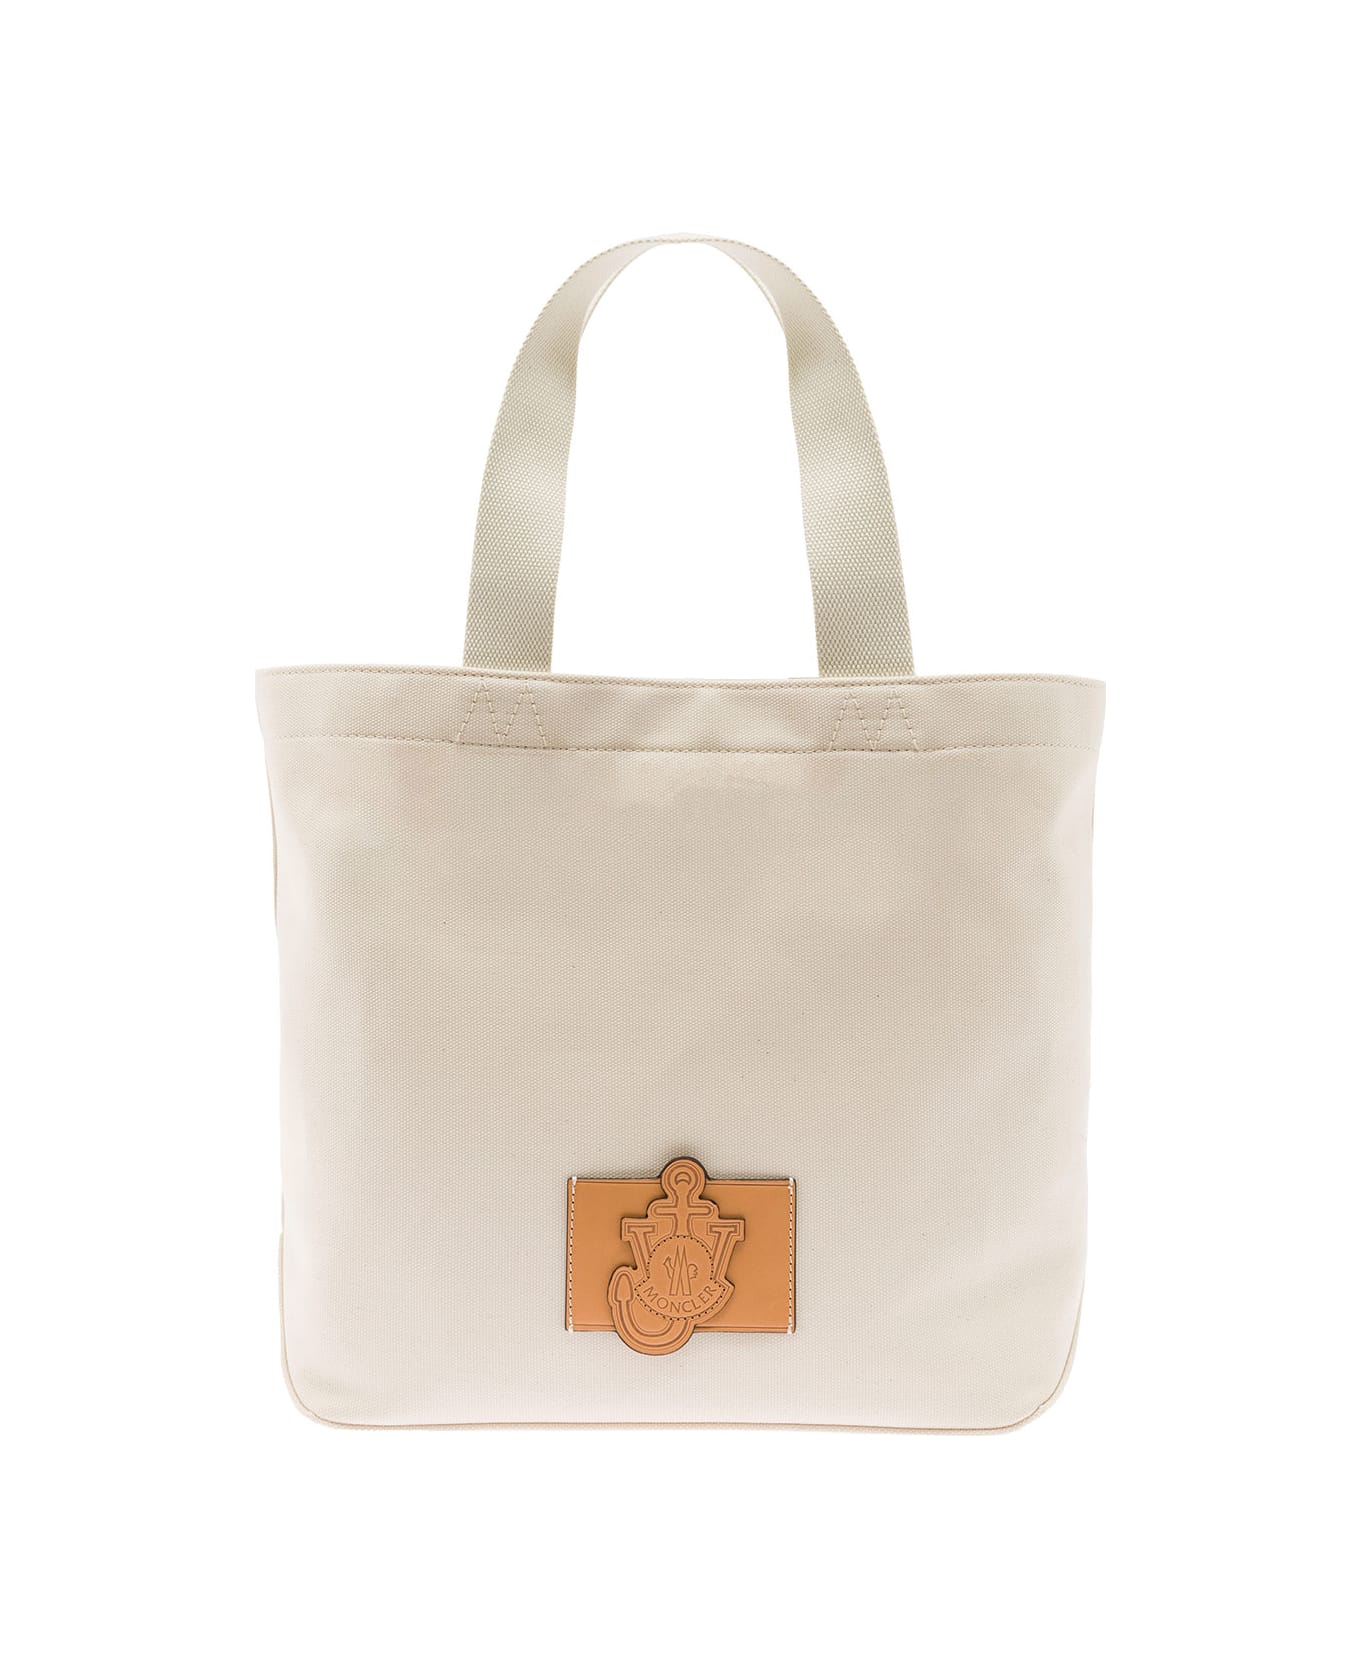 Moncler Genius Medium White Tote Bag With Graphic Print And Logo Patch In Canvas Woman - White